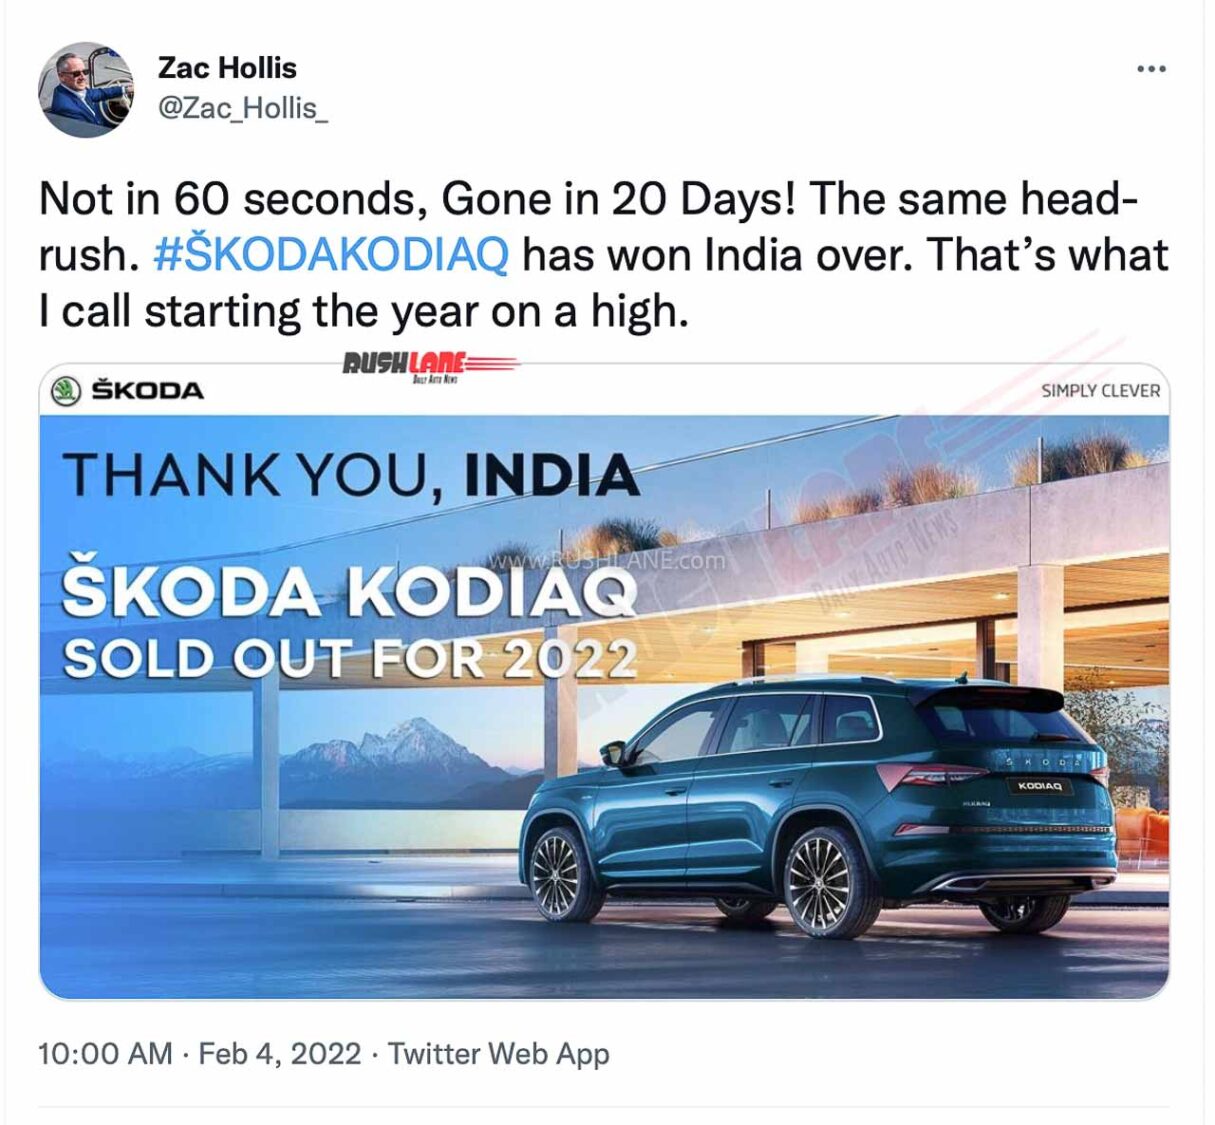 New Skoda Kodiaq sold out in India